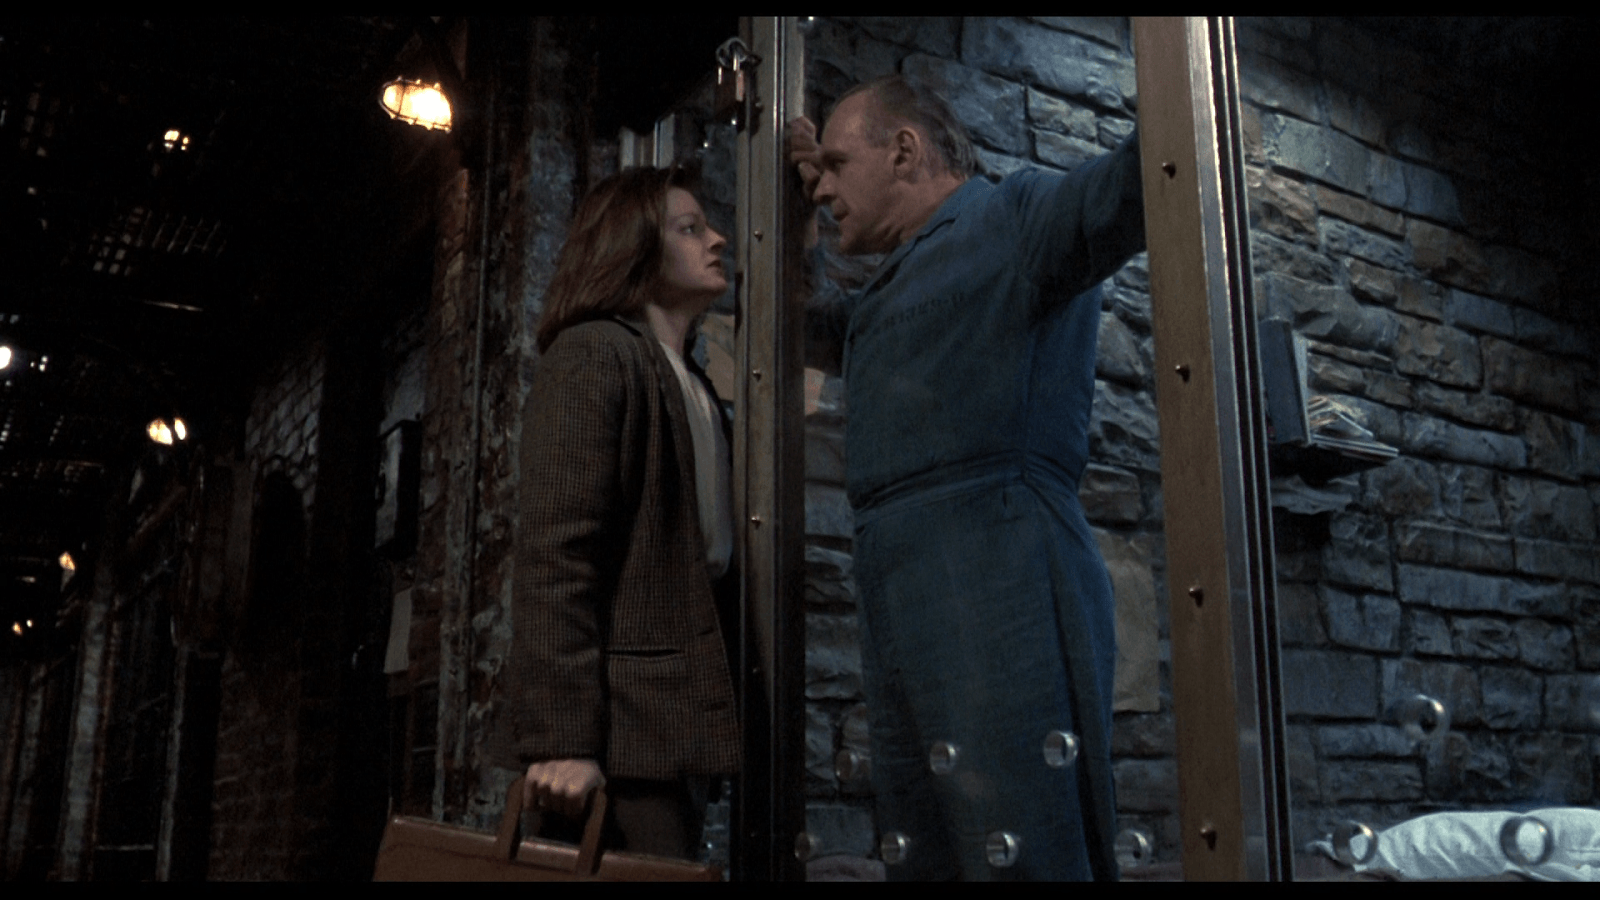 Script Analysis: “The Silence of the Lambs”